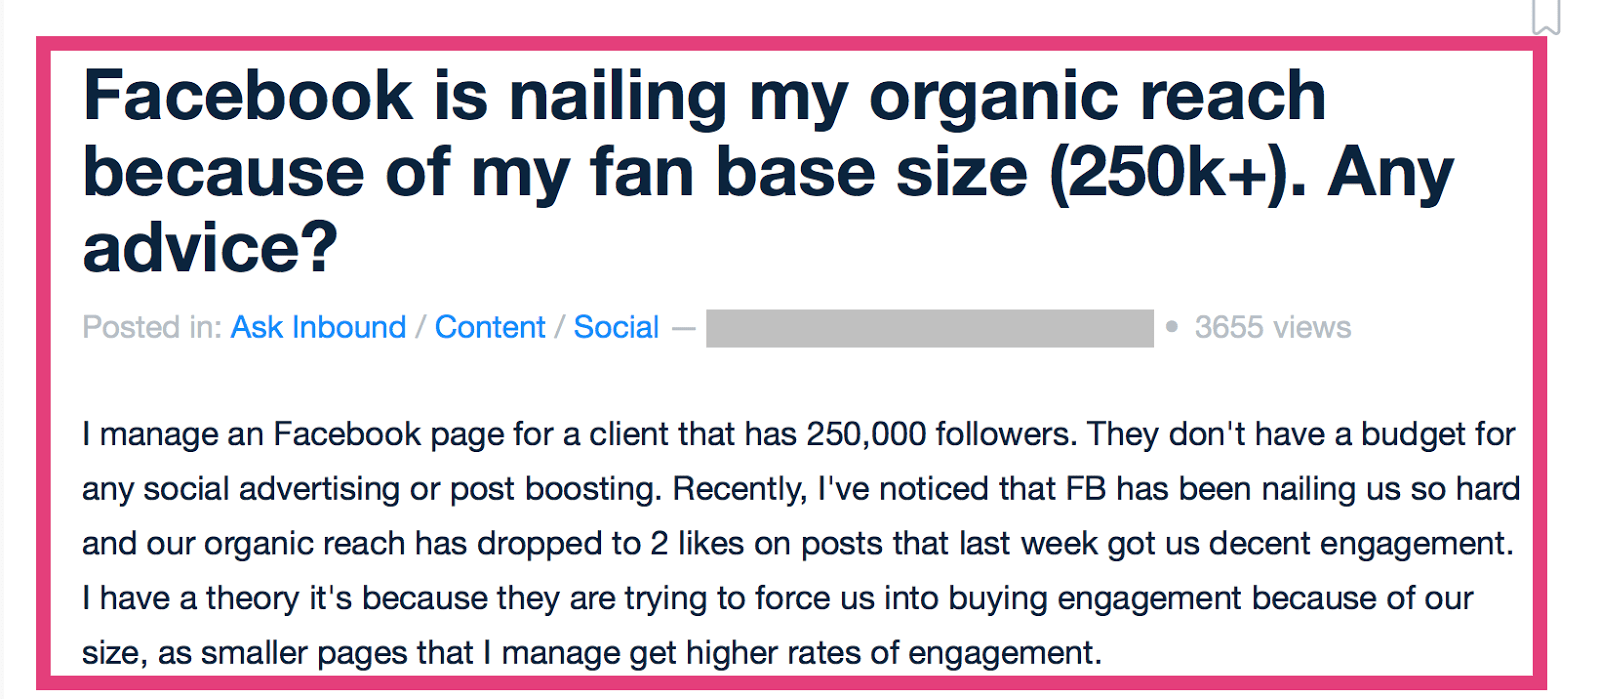 An online question someone has about why their Facebook organic reach is being penalized.